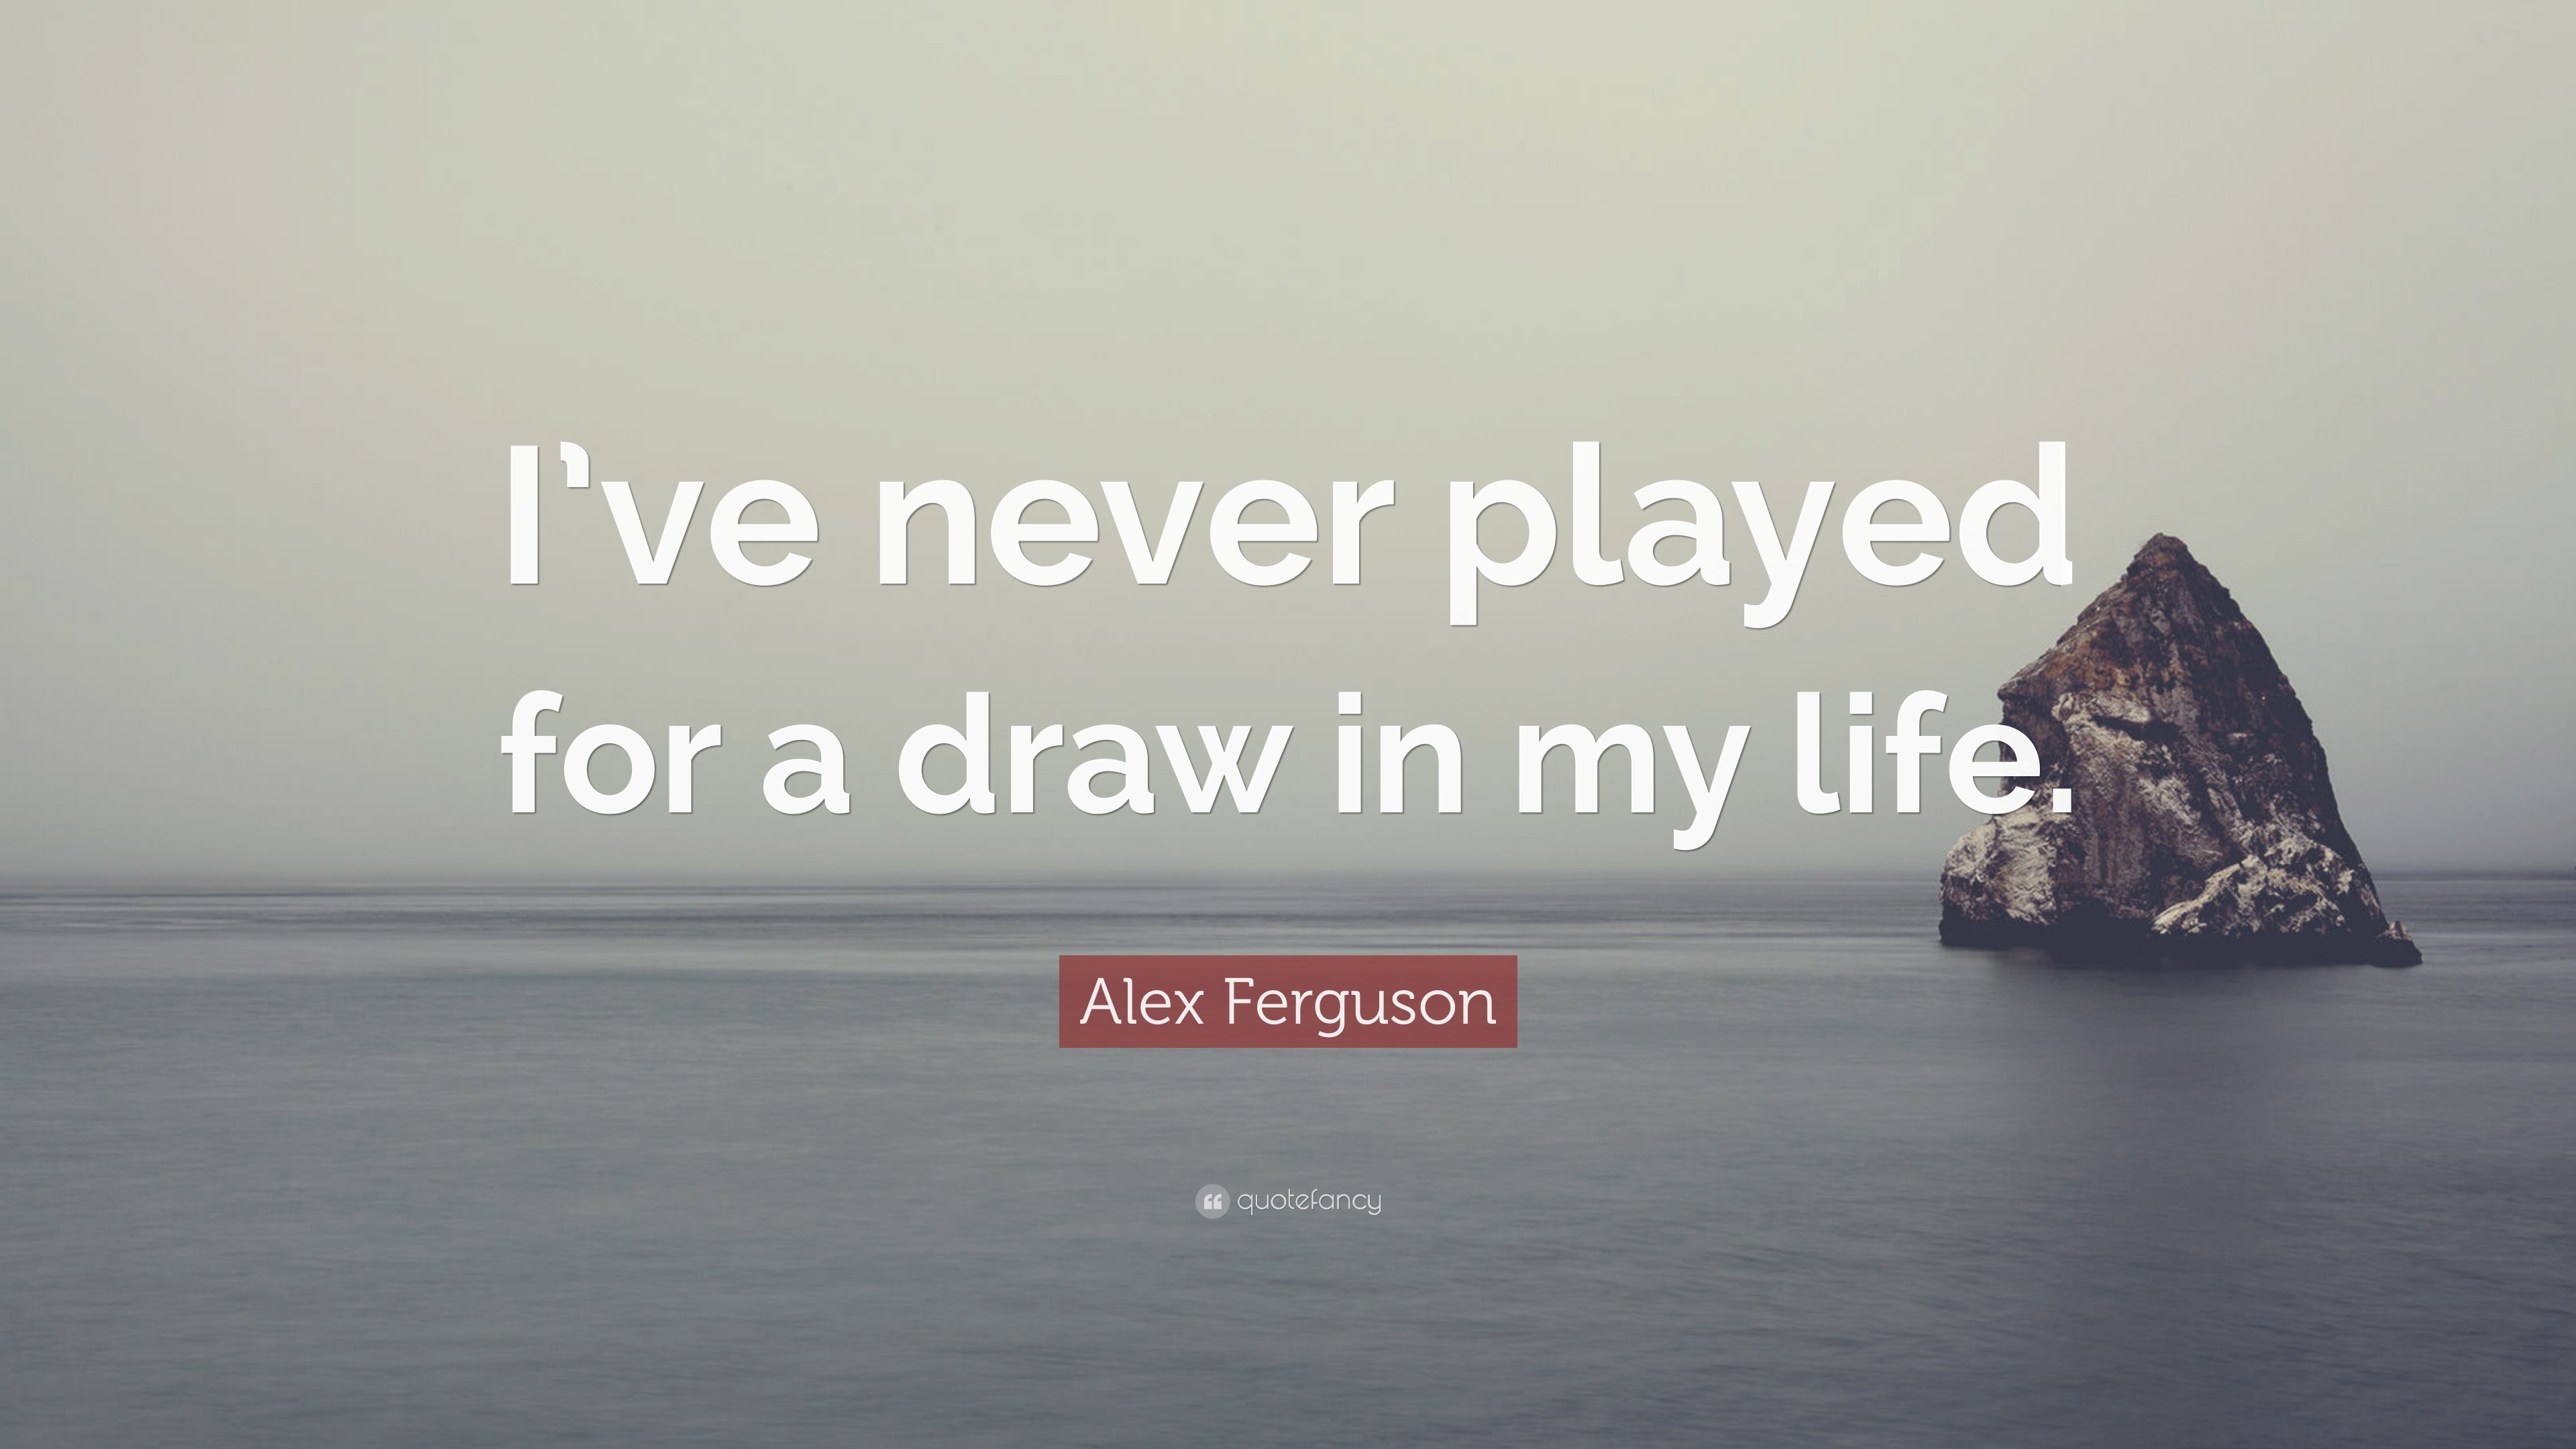 3840x2160 Alex Ferguson Quote: “I've never played for a draw in my life